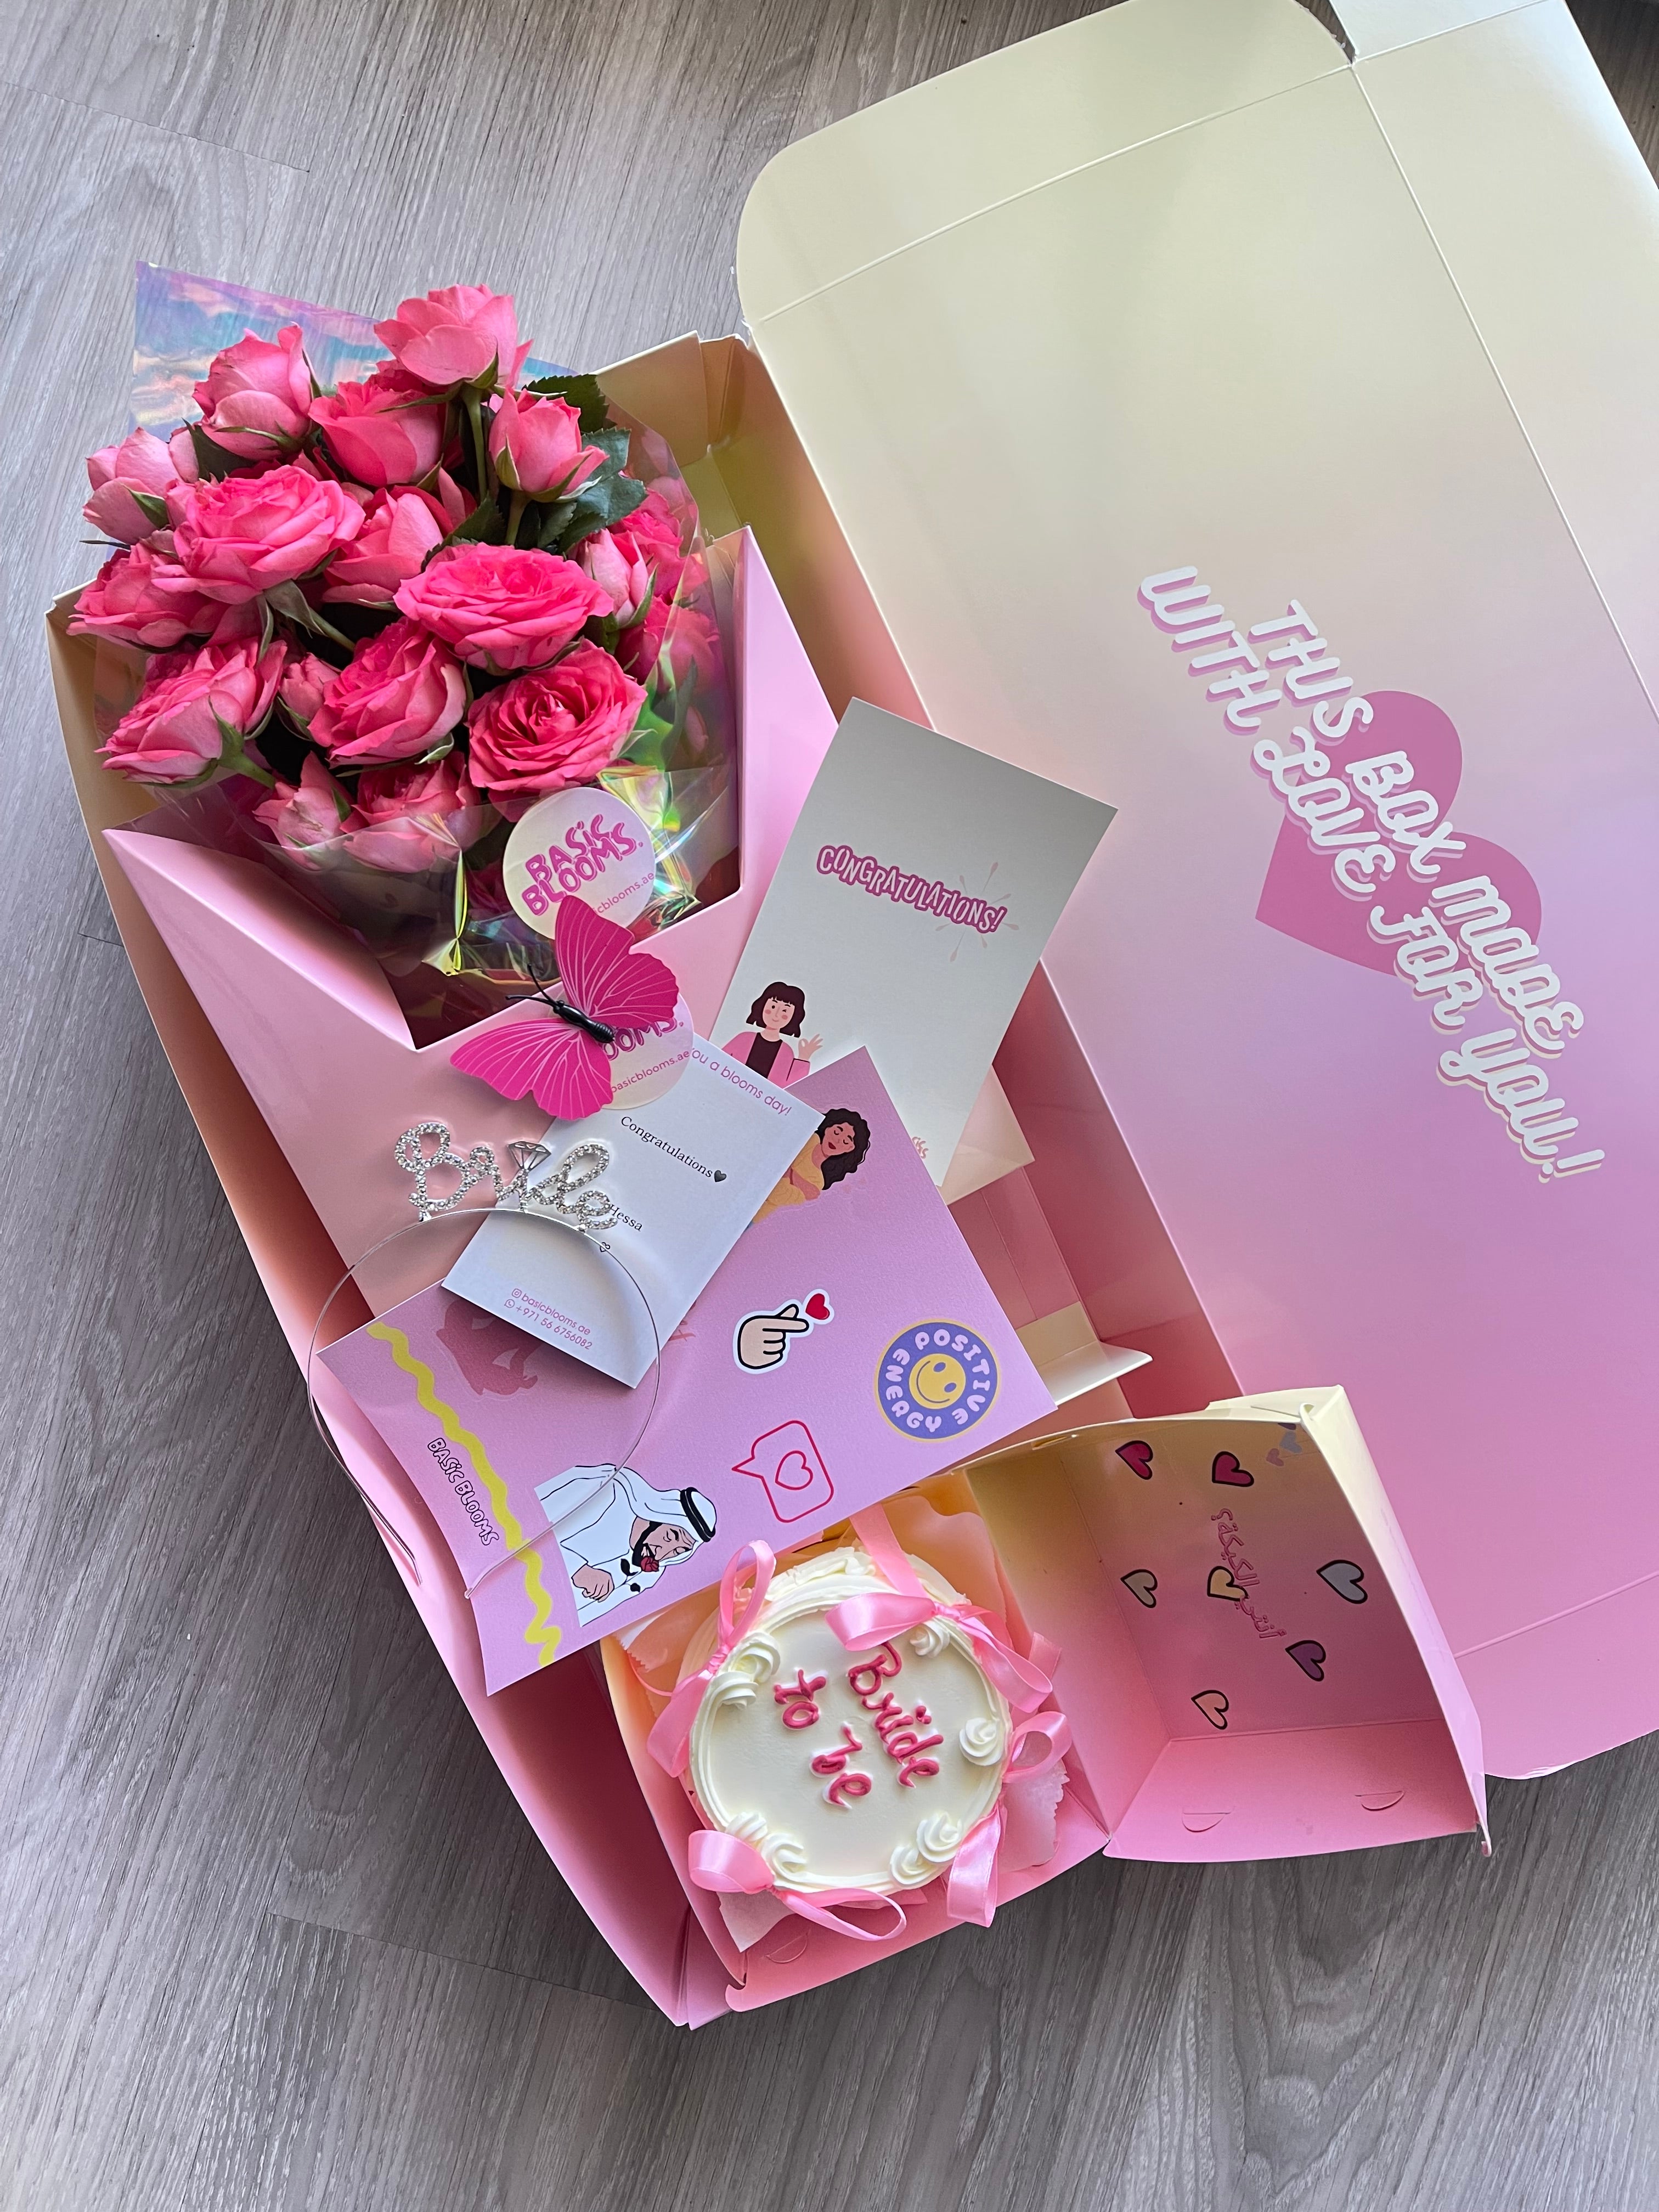 Bride to be box